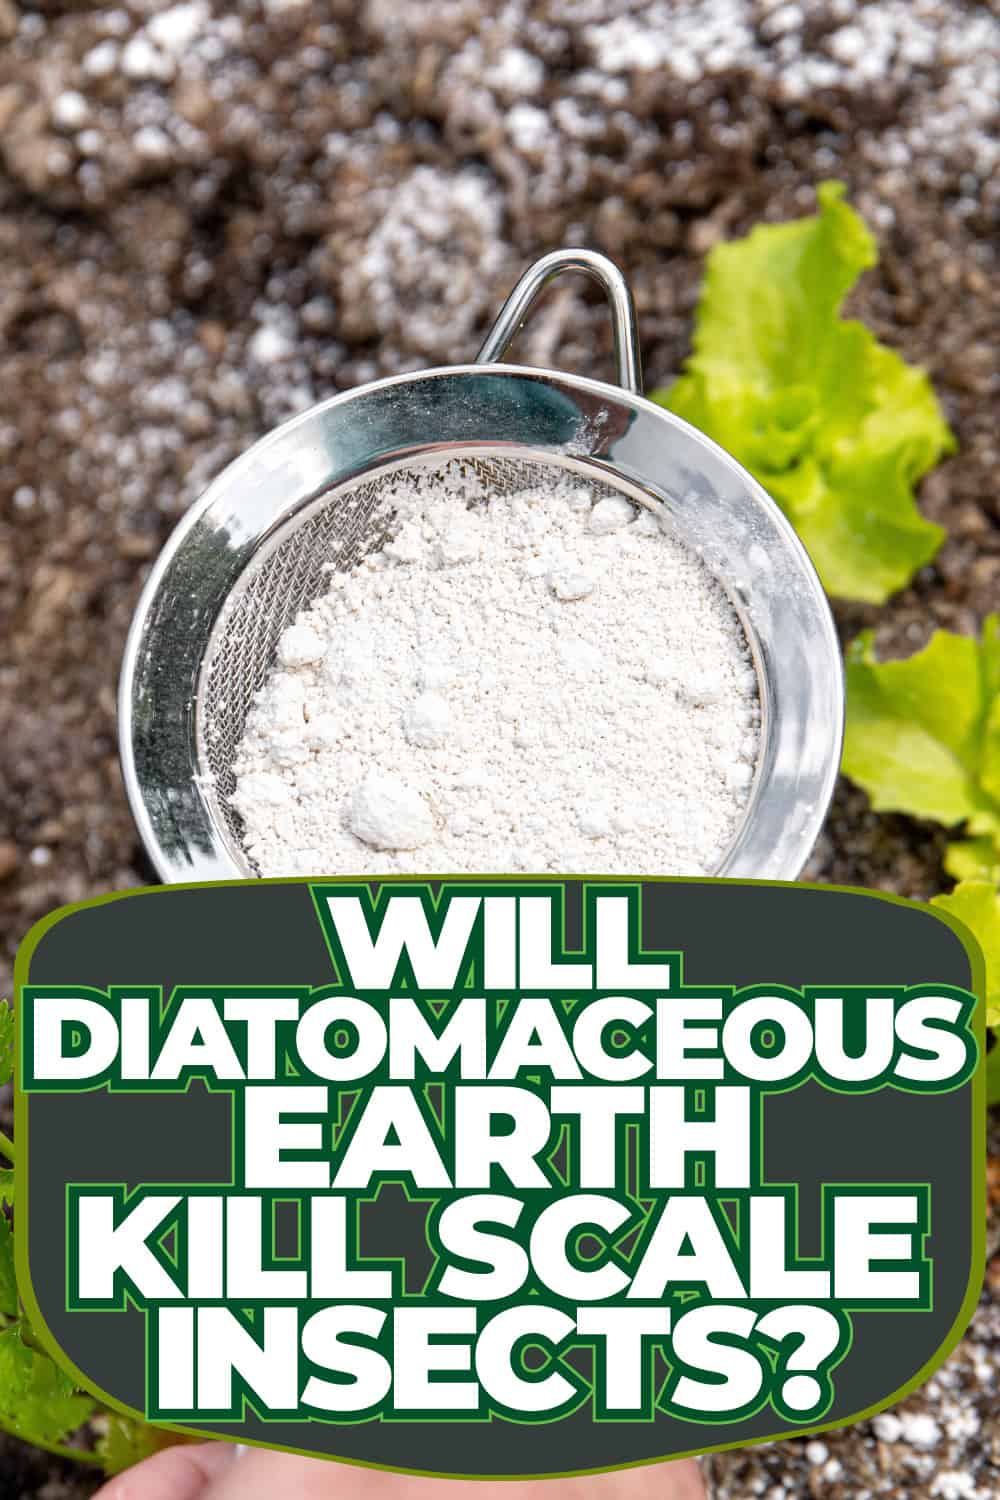 Will Diatomaceous Earth Kill Scale Insects?